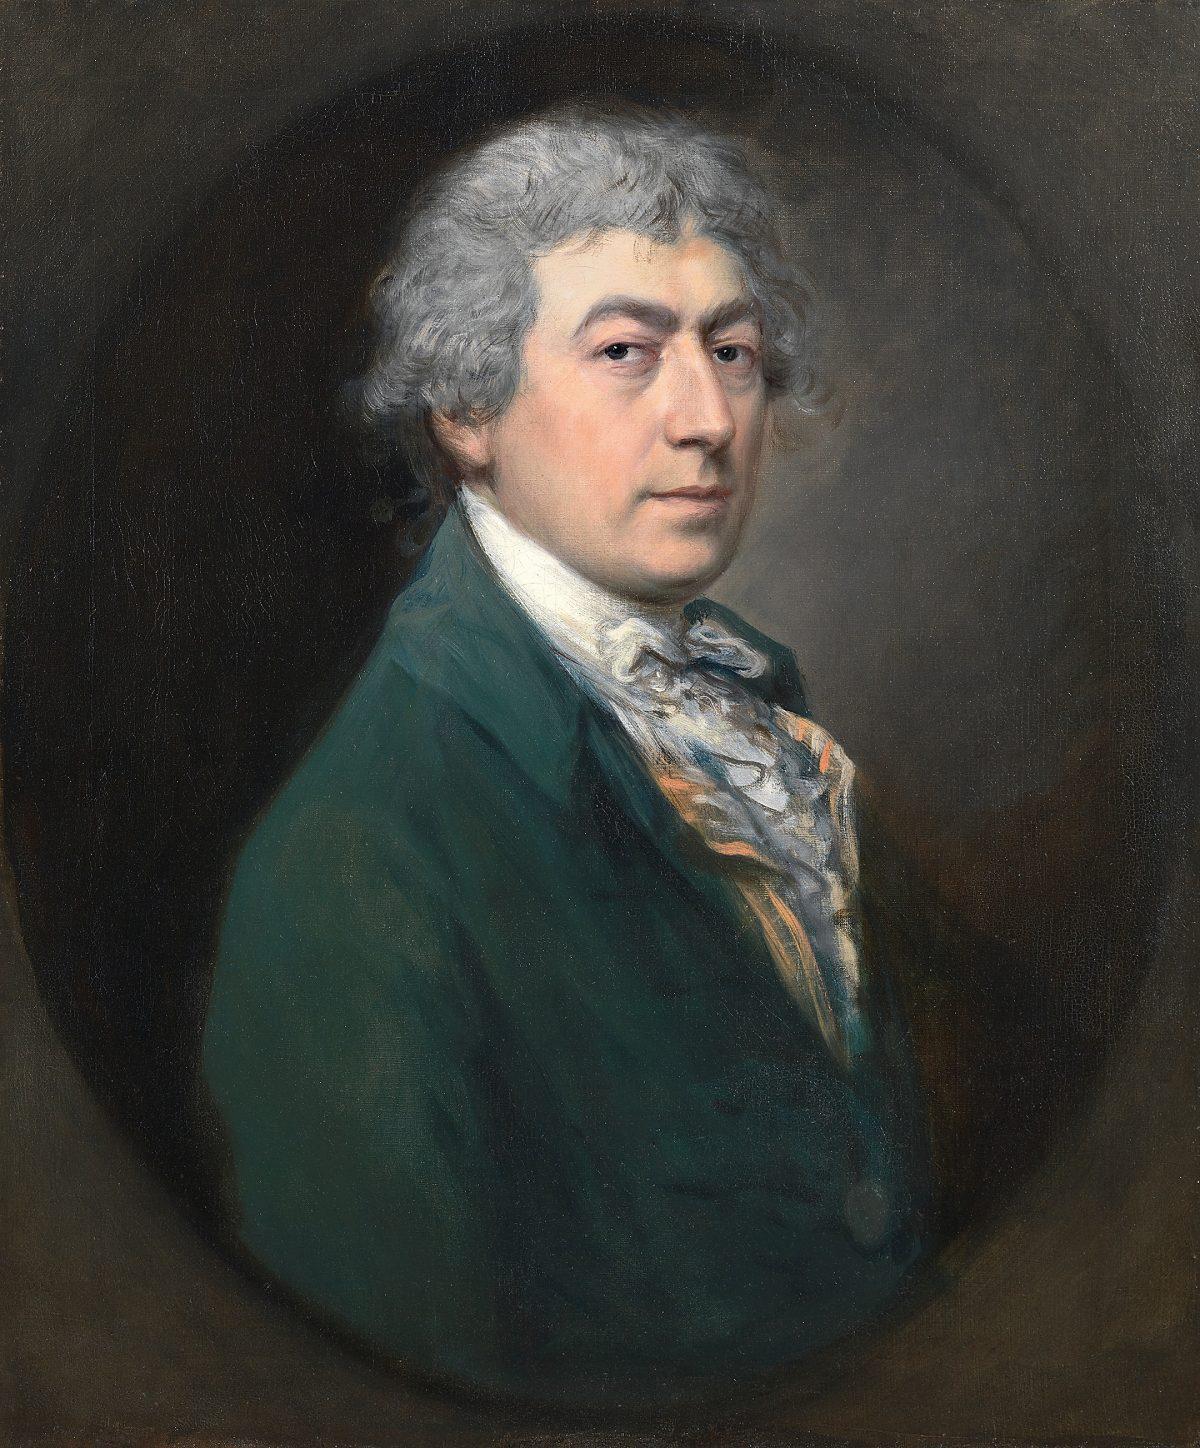 Self-portrait, mid-1770s and 1790, by Thomas Gainsborough, completed by Gainsborough Dupont. Oil on canvas. The Samuel Courtauld Trust. (The Courtauld Gallery, London)